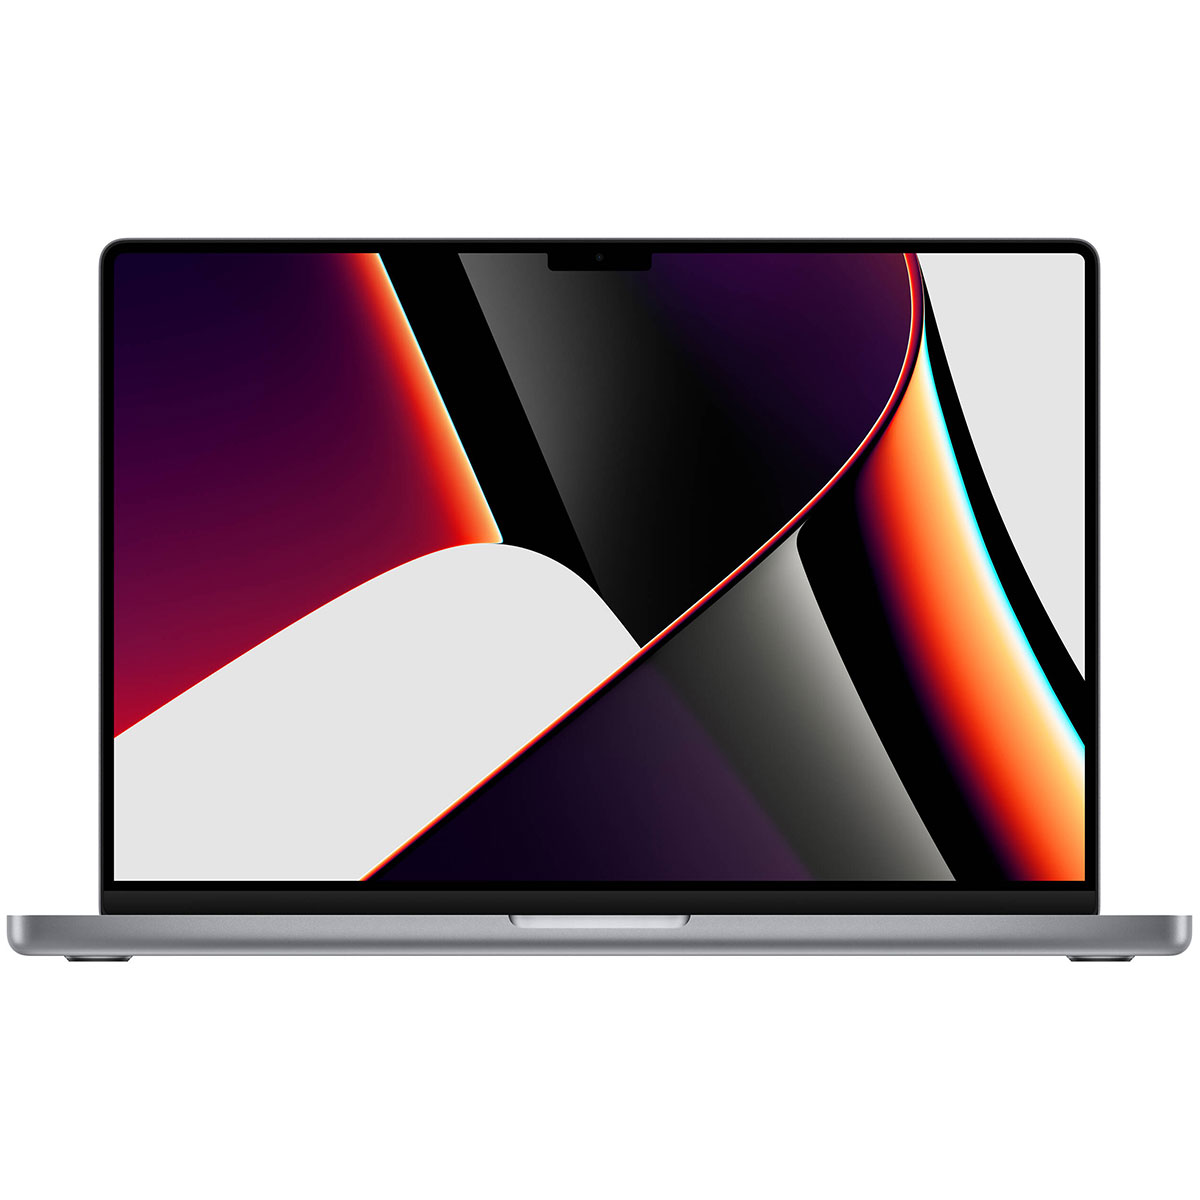 16-inch MacBook Pro: Apple M2 Pro chip with 12-core CPU and 19-core GPU, 1TB SSD - Space Gray